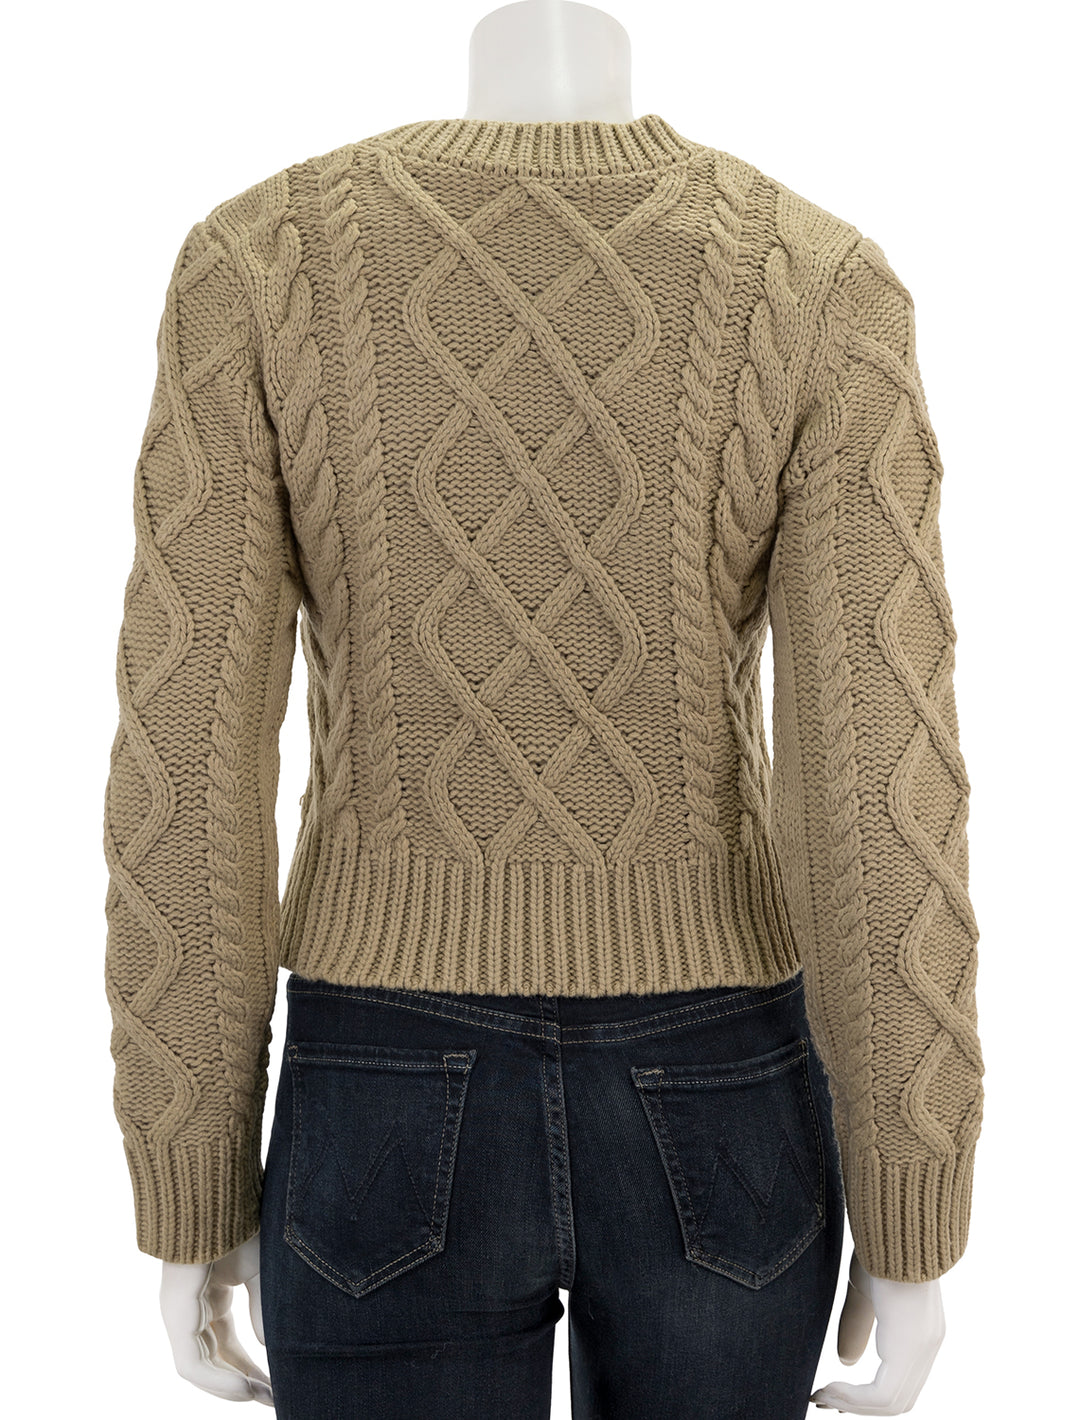 Back view of English Factory's cable knit sweater in oatmeal.